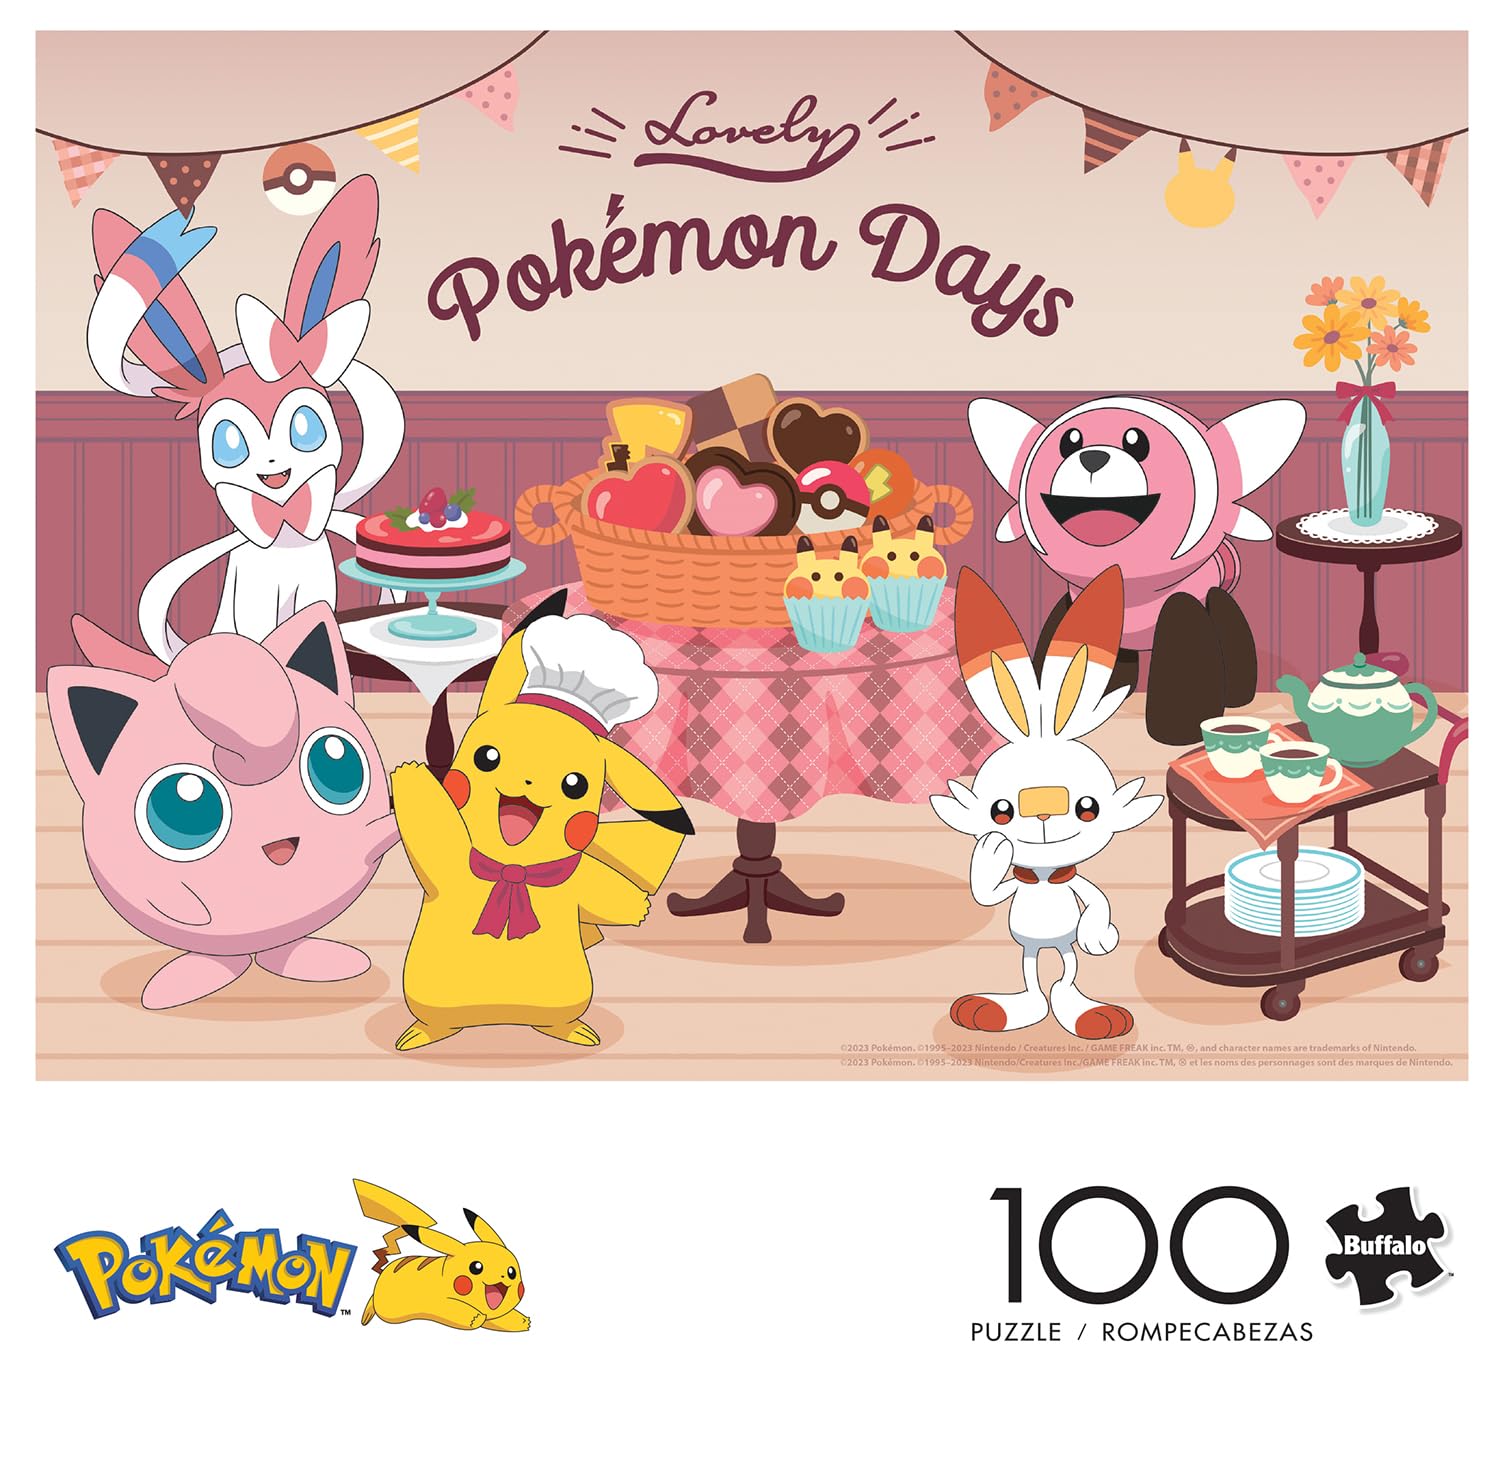 Buffalo Games - Pokemon - Lovely Pokemon Days - 100 Piece Jigsaw Puzzle for Adults Challenging Puzzle Perfect for Game Nights - Finished Size 15.00 x 11.00